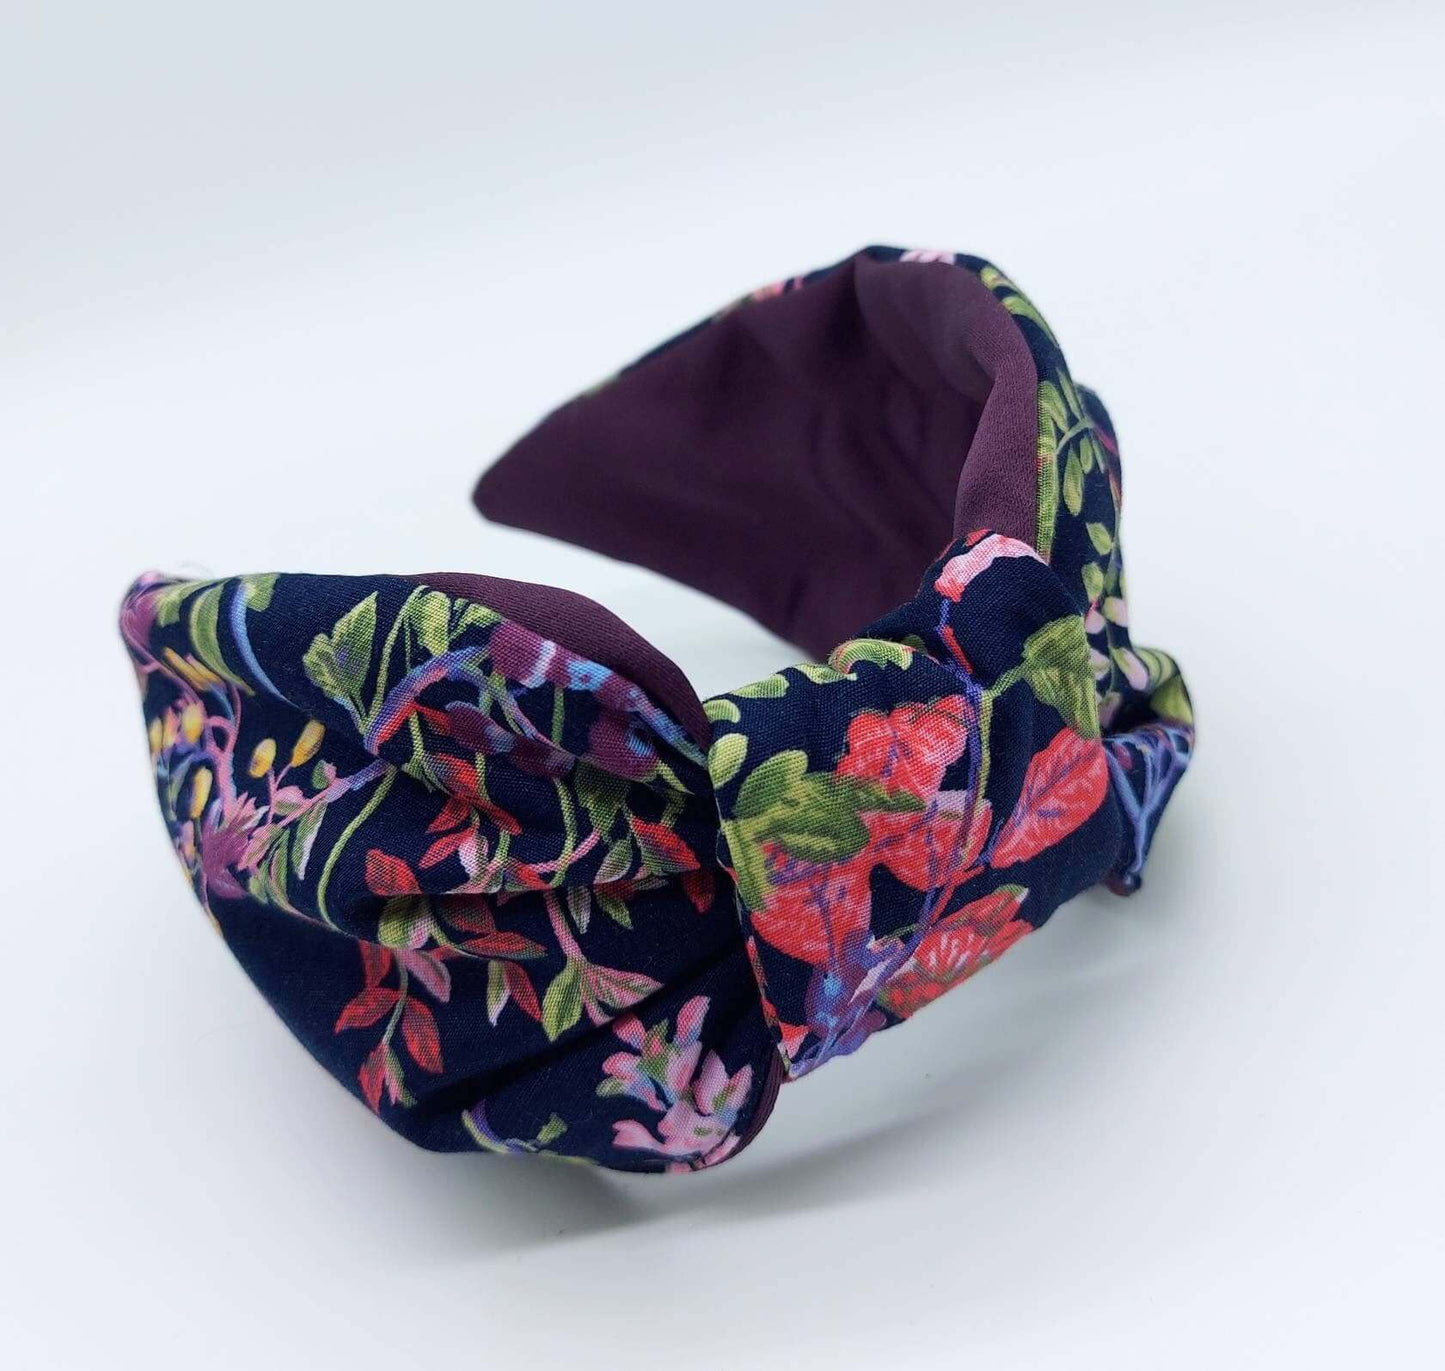 A bow-style, navy blue, red, purple and green floral fabric knot headband with purple satin lining underneath.